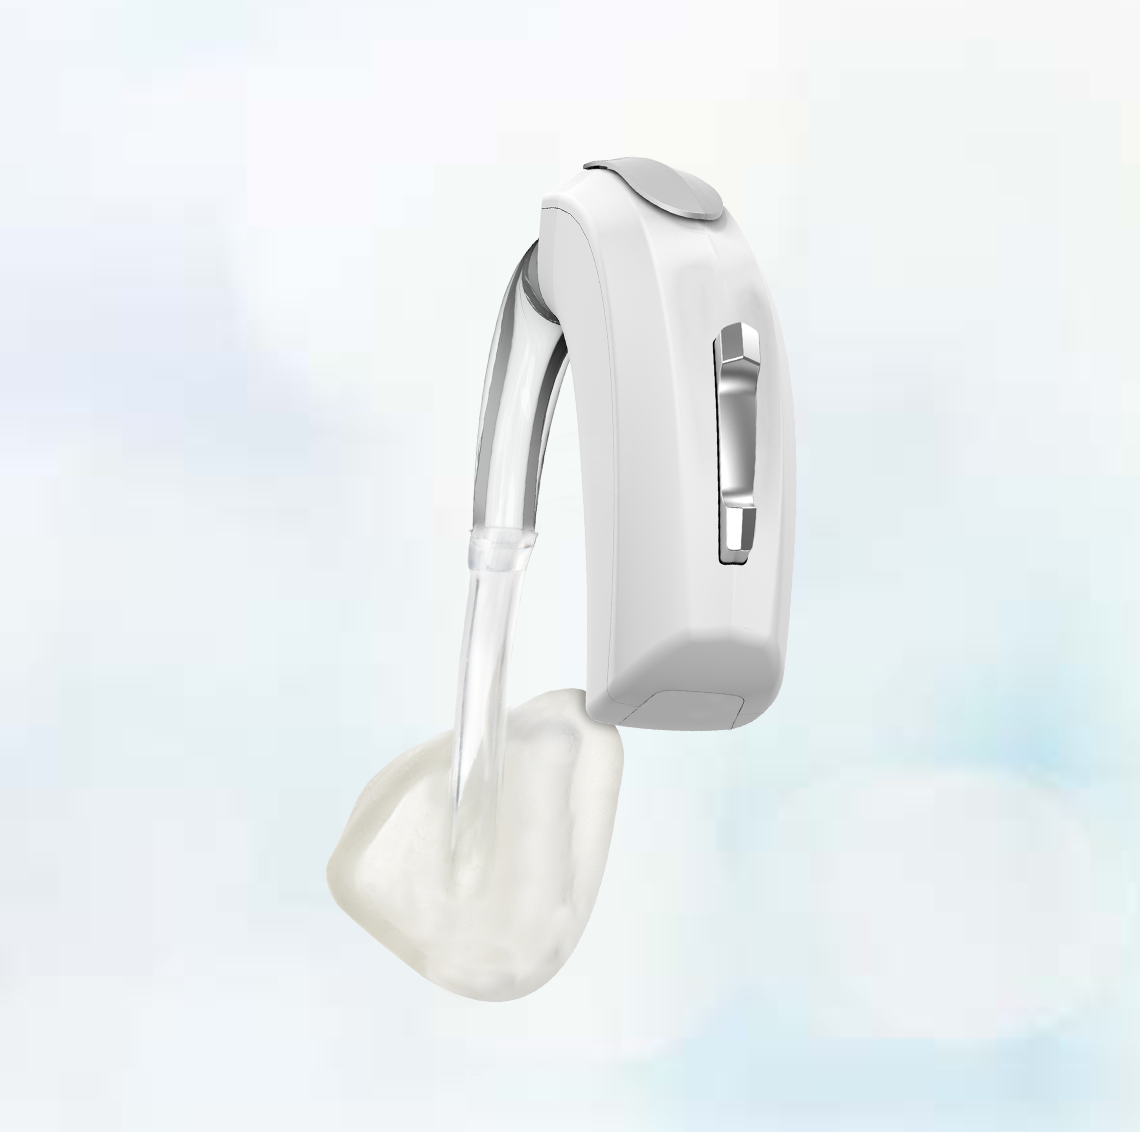 BTE hearing aid with earmold.